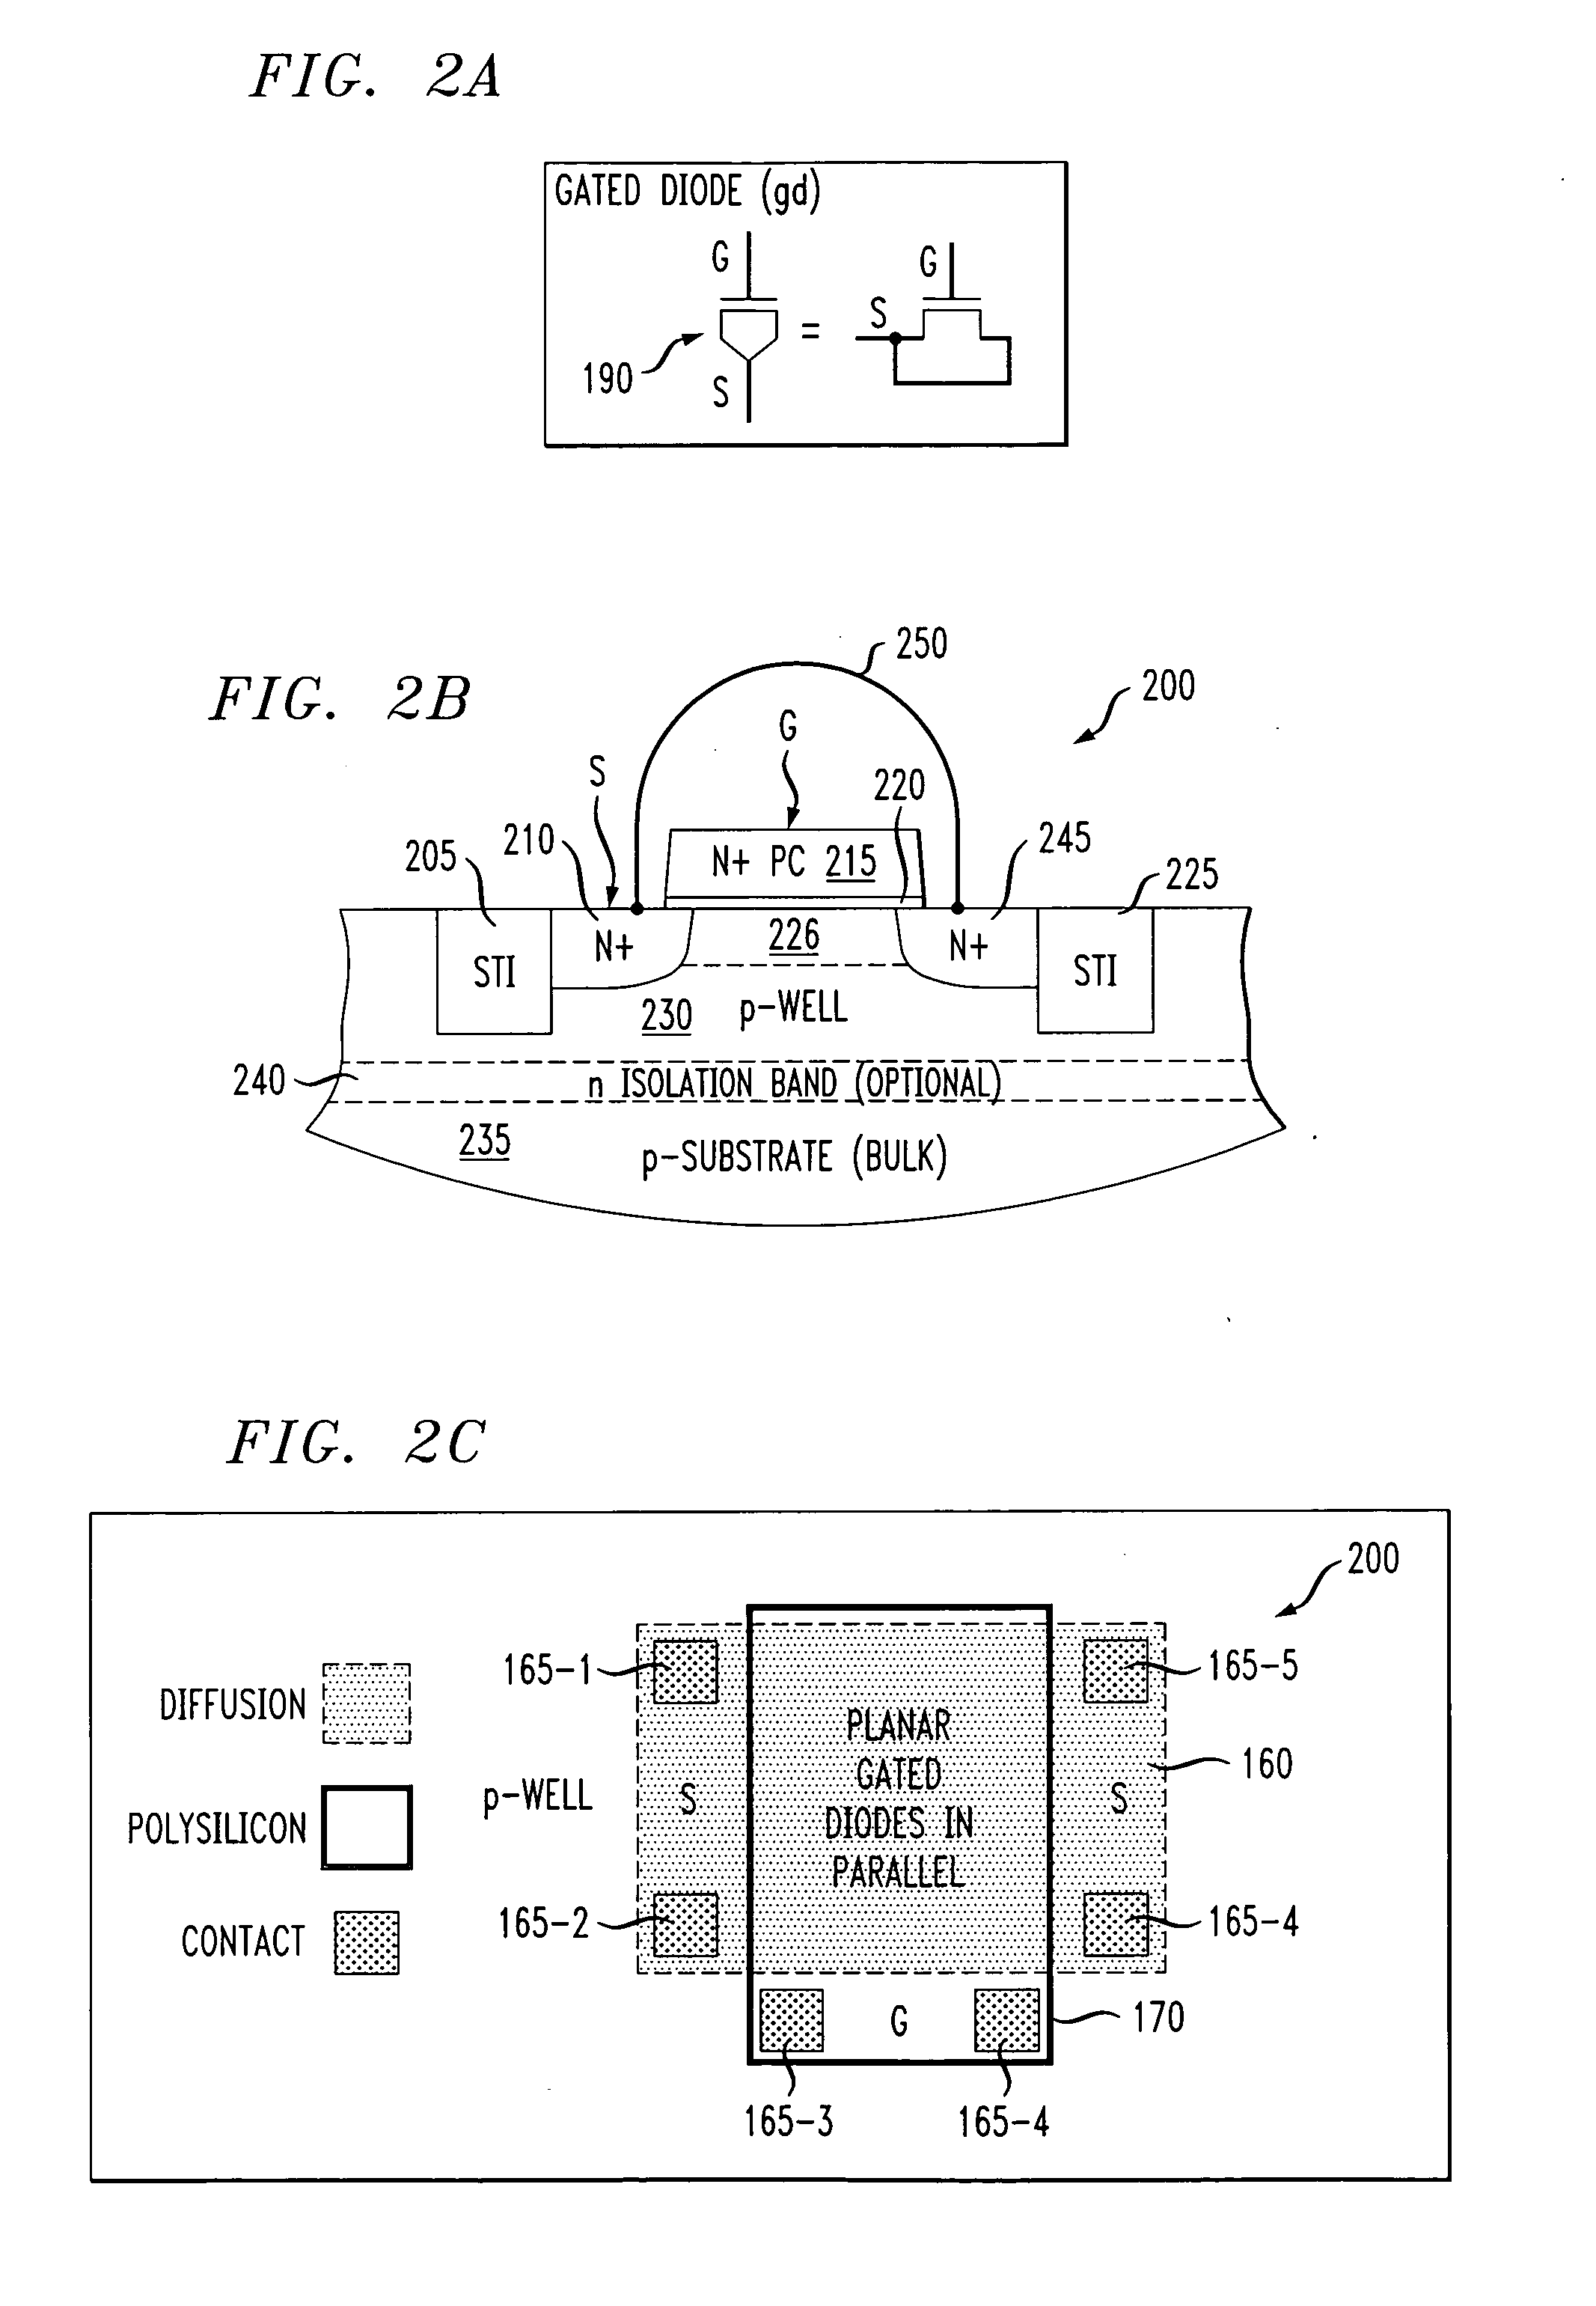 Amplifiers using gated diodes